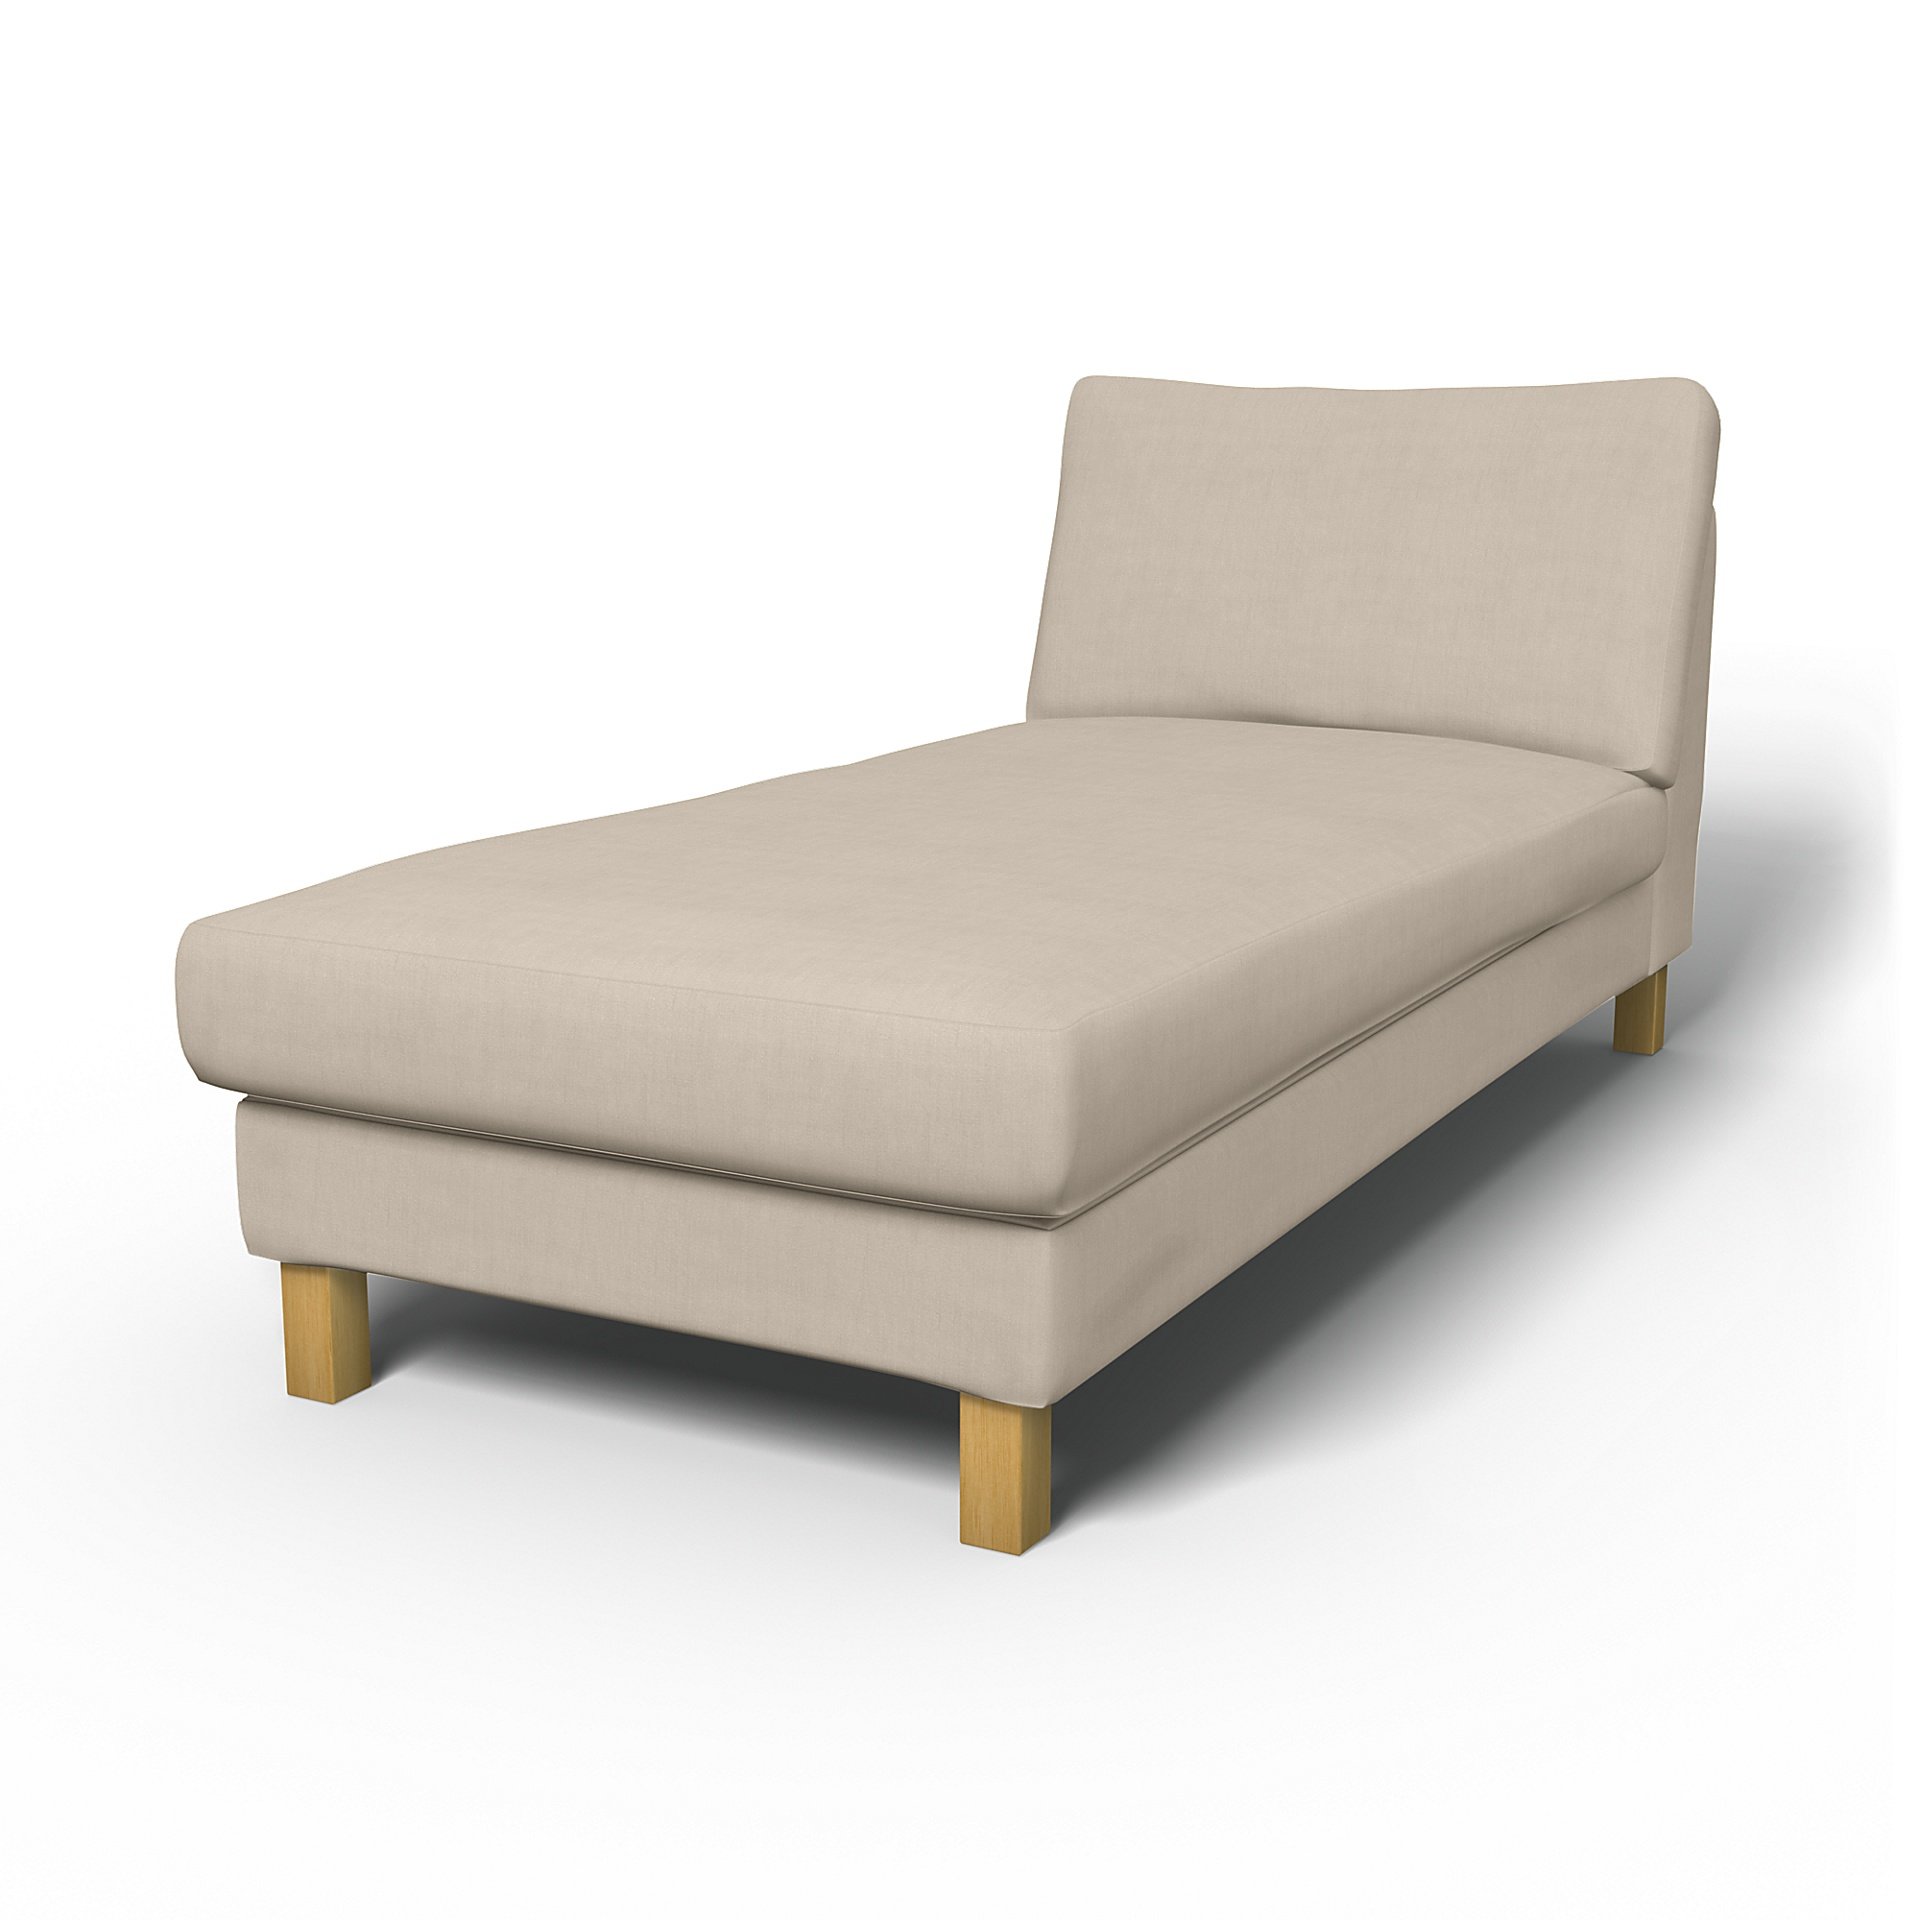 IKEA - Karlstad Stand Alone Chaise Longue Cover, Parchment, Linen - Bemz